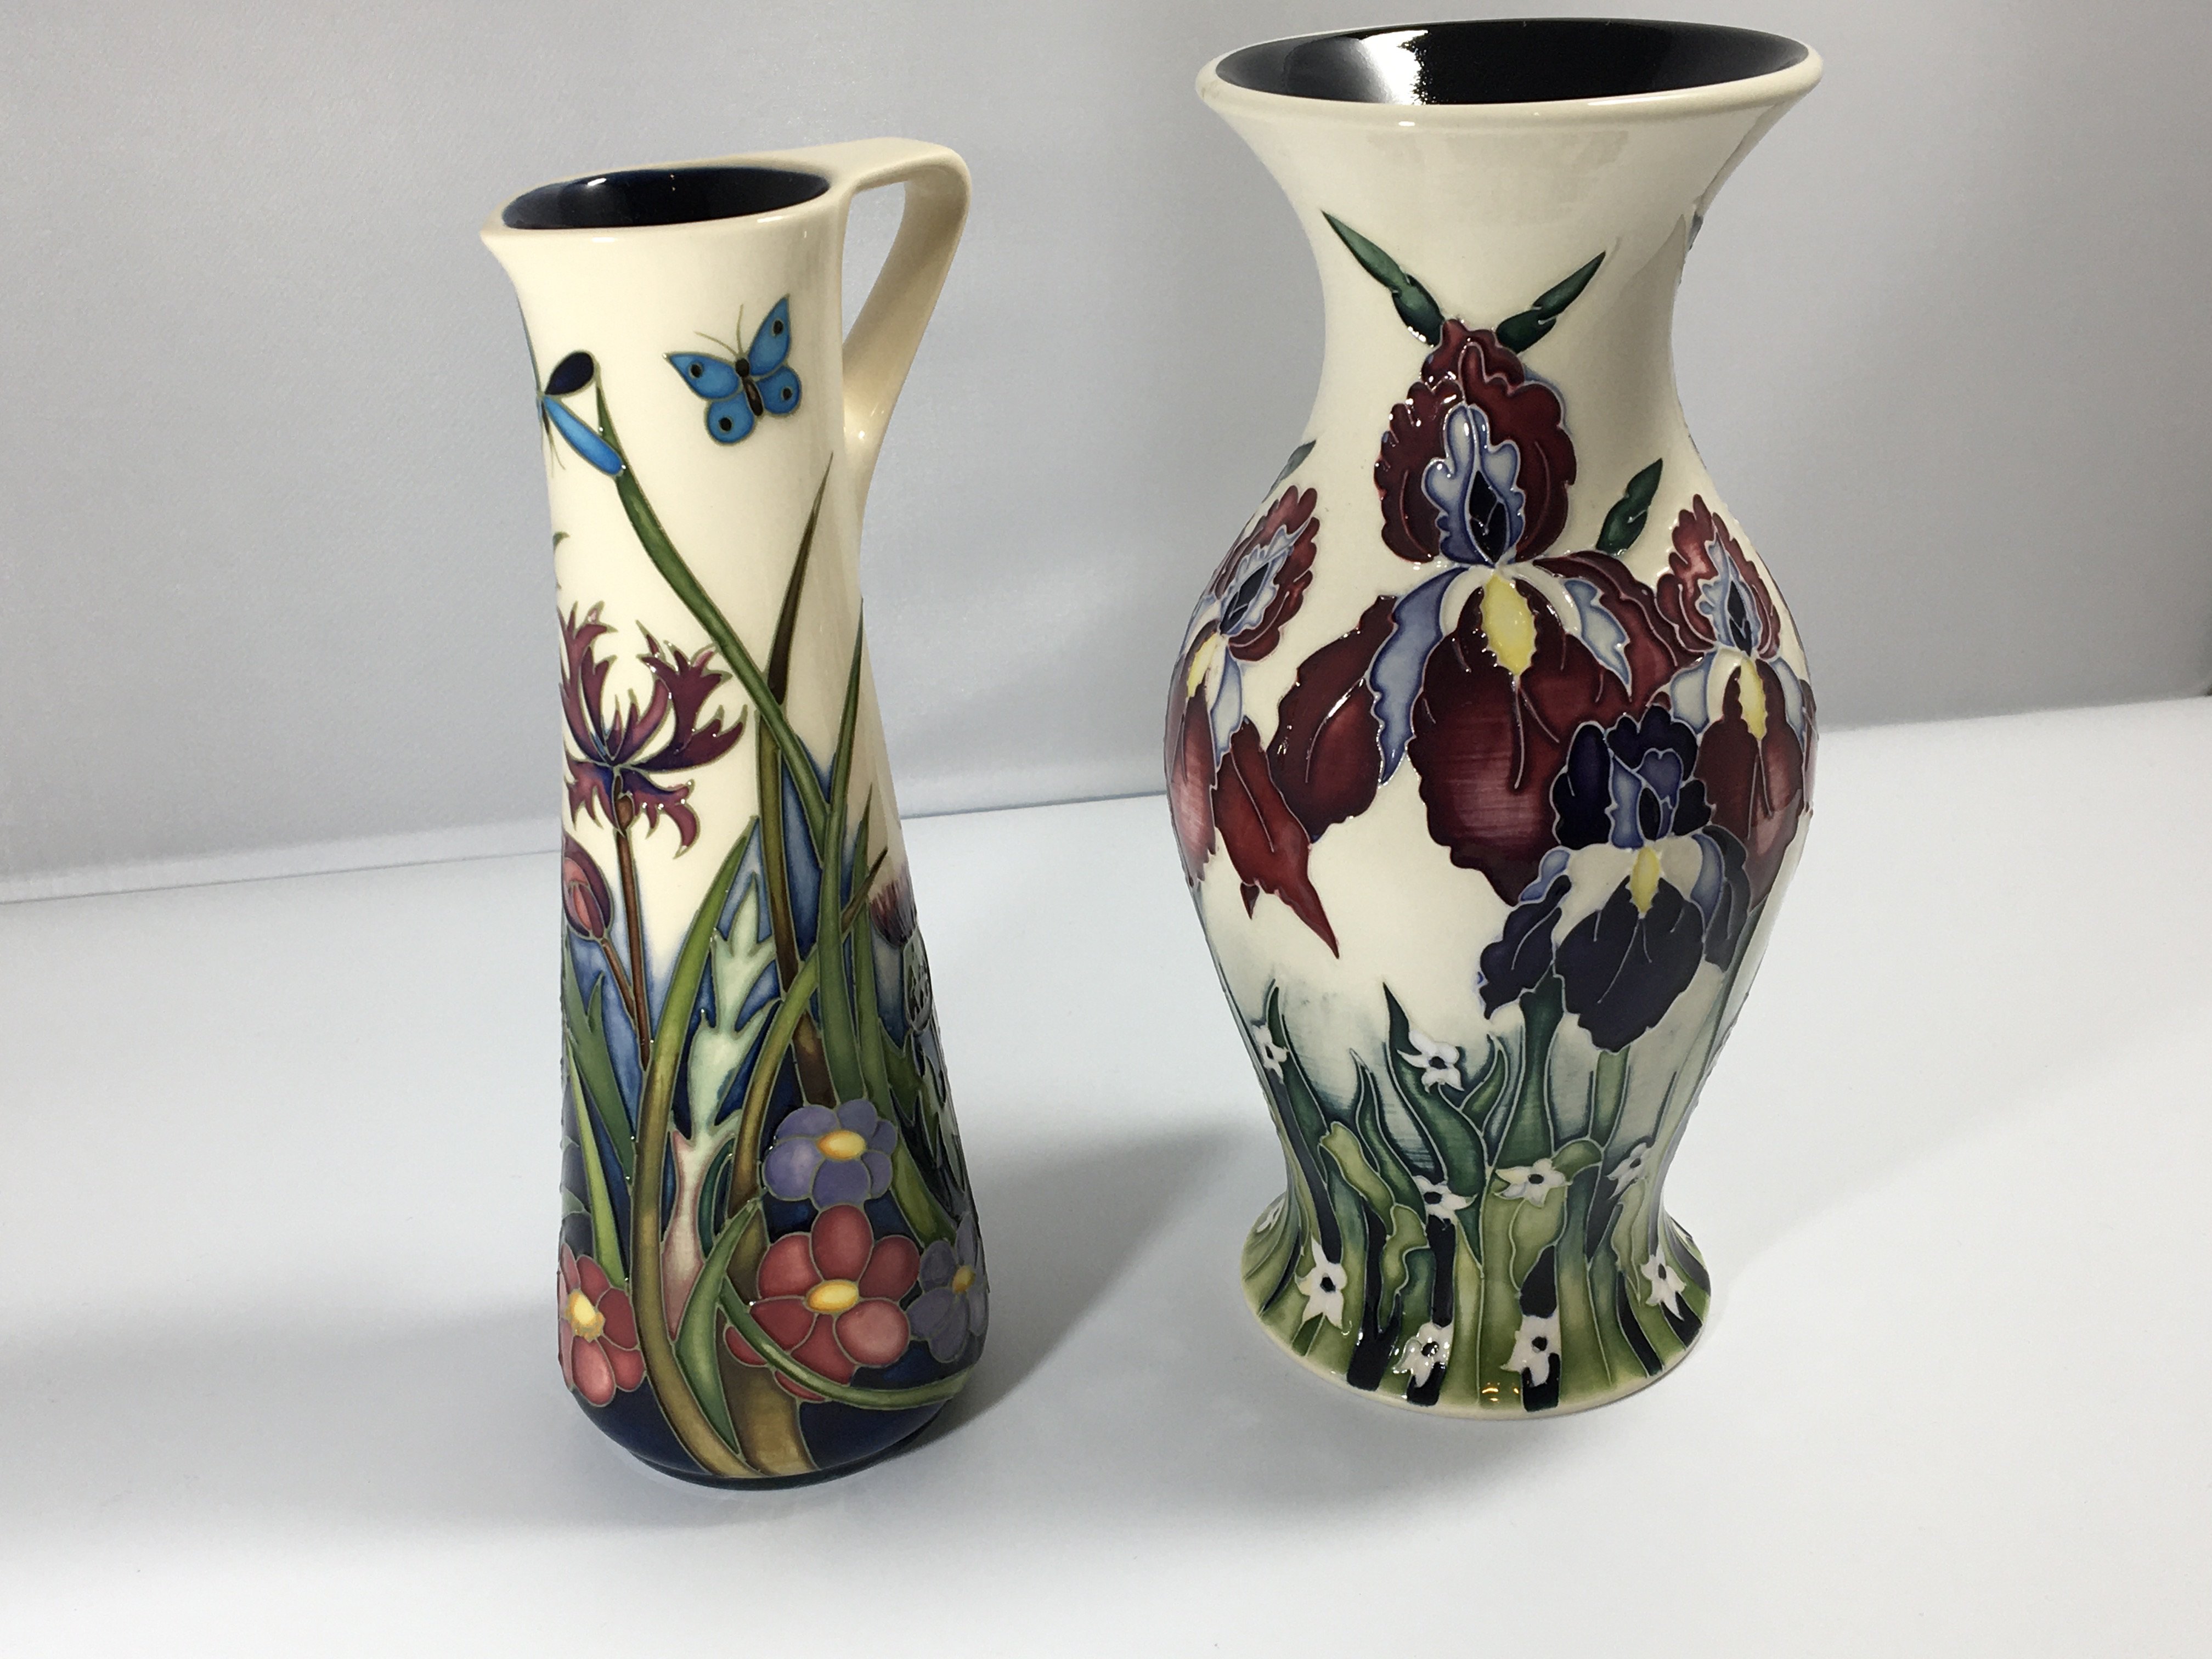 A Moorcroft jug decorated with thistle a d wild fl